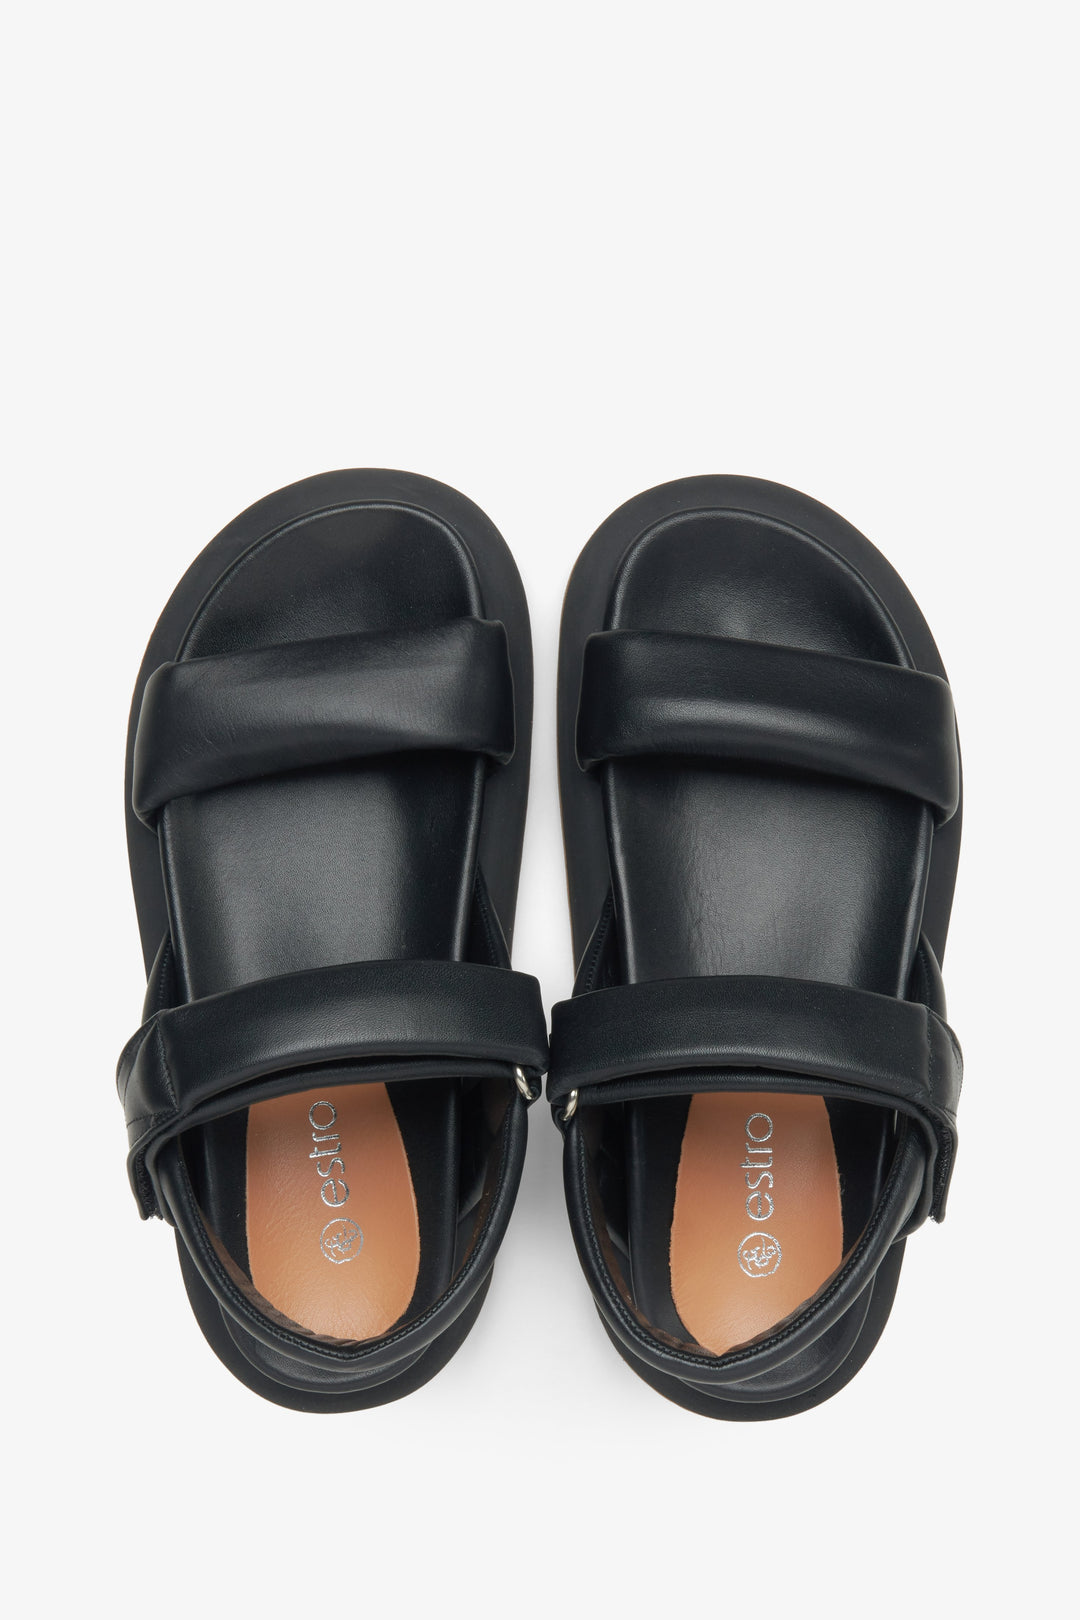 Women's black sandals with a soft sole by Estro - top view presentation of the model.